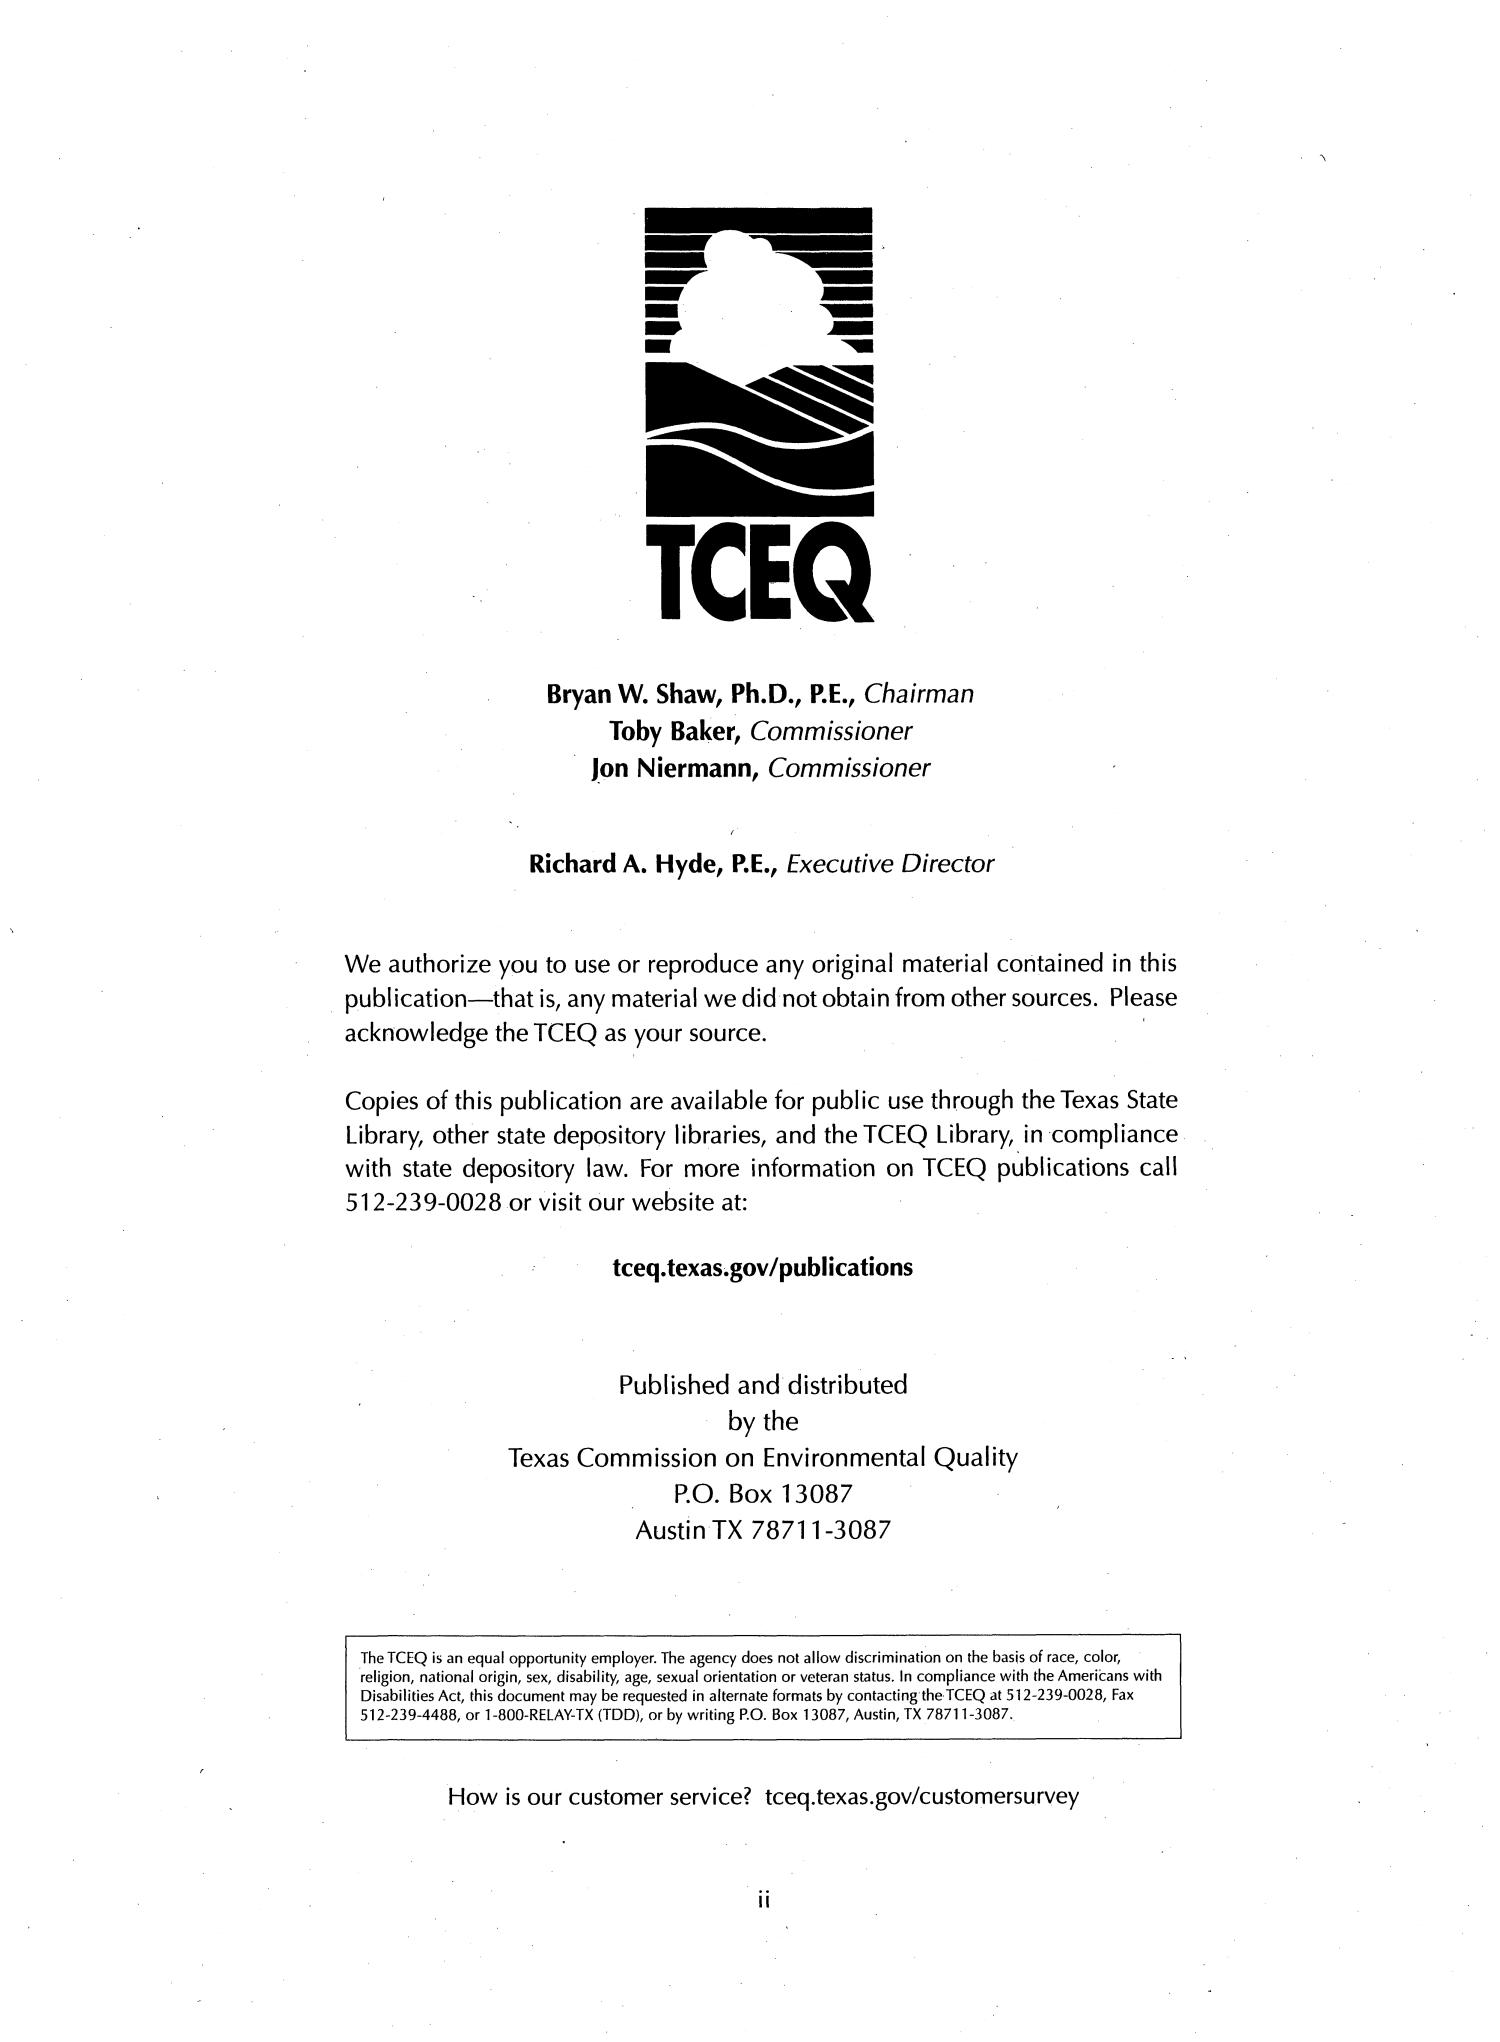 Texas Commission on Environmental Quality Annual Financial Report: 2015
                                                
                                                    II
                                                